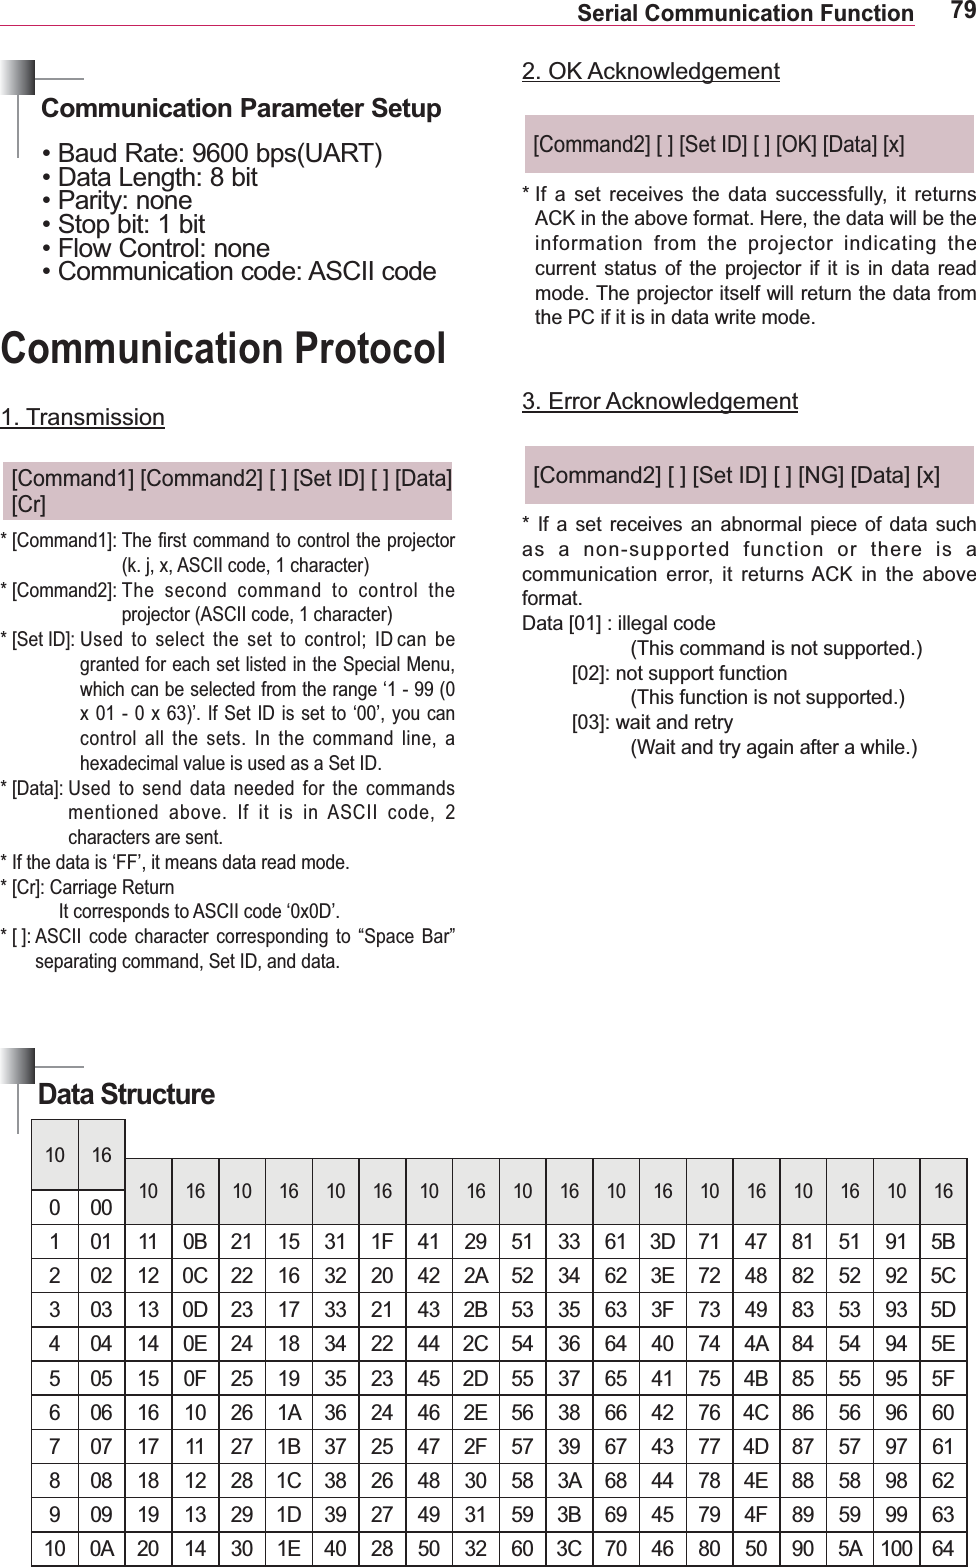 79Serial Communication Function Communication Protocol[Cr] The first command to control the projector * [Command2]:  The second command to control the * [Set ID]:  Used to select the set to control; ID can be granted for each set listed in the Special Menu, control all the sets. In the command line, a * [Data]:  Used to send data needed for the commands mentioned above. If it is in ASCII code, 2 characters are sent.* If the data is ‘FF’, it means data read mode.* [Cr]:   Carriage Return* [ ]:  ASCII code character corresponding to “Space Bar” separating command, Set ID, and data.Communication Parameter Setup*  If a set receives the data successfully, it returns information from the projector indicating the current status of the projector if it is in data read mode. The projector itself will return the data from the PC if it is in data write mode.3. Error Acknowledgement* If a set receives an abnormal piece of data such as a non-supported function or there is a       format. illegal code (This command is not supported.)(This function is not supported.)(Wait and try again after a while.)Data Structure                        29  33  3D  47    5B  22  32  42 2A 52 34 62 3E 72   52 92 5C  23  33  43 2B 53 35 63 3F 73 49  53 93 5D  24  34 22 44 2C 54 36 64  74 4A  54 94 5E  25  35 23 45 2D 55 37 65  75 4B  55 95 5F  26  36 24 46 2E 56  66 42 76 4C  56 96   27  37 25 47 2F 57 39 67 43 77 4D  57 97      26    3A  44  4E    62  29  39 27 49  59 3B 69 45 79 4F  59 99 63       32  3C  46    5A  64 2345679 